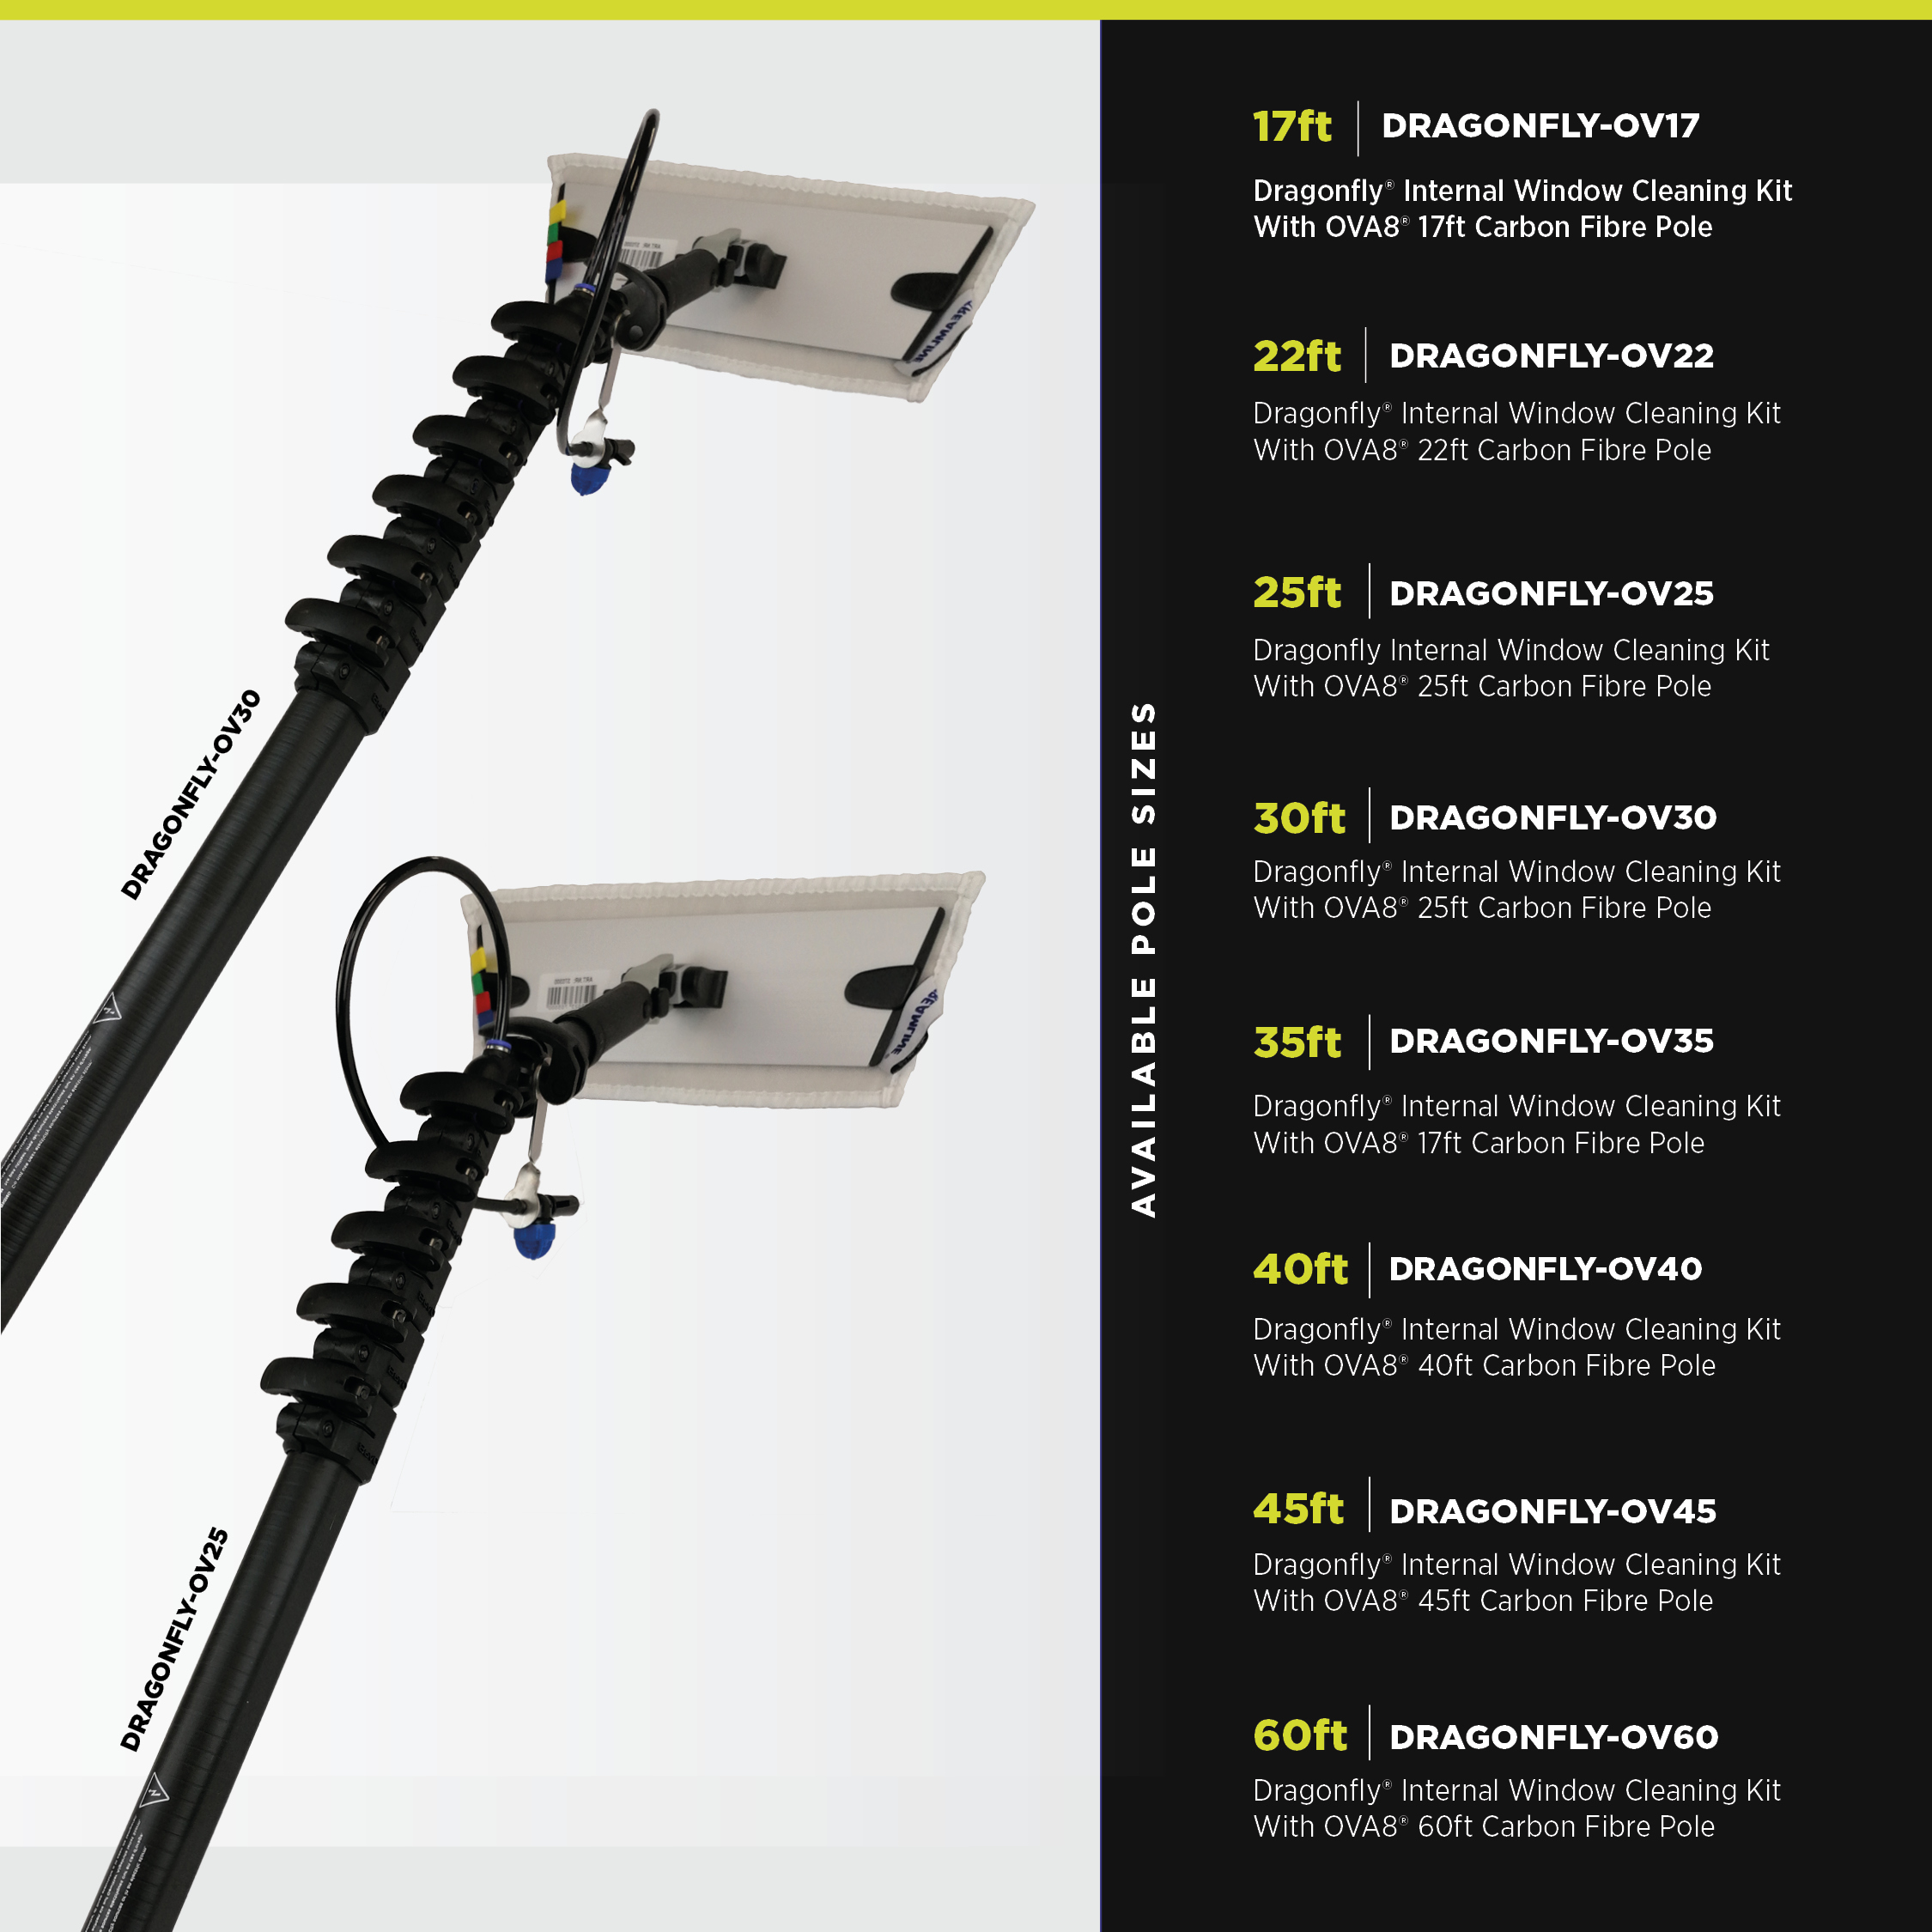 the 17ft pole for internal window cleaning kits